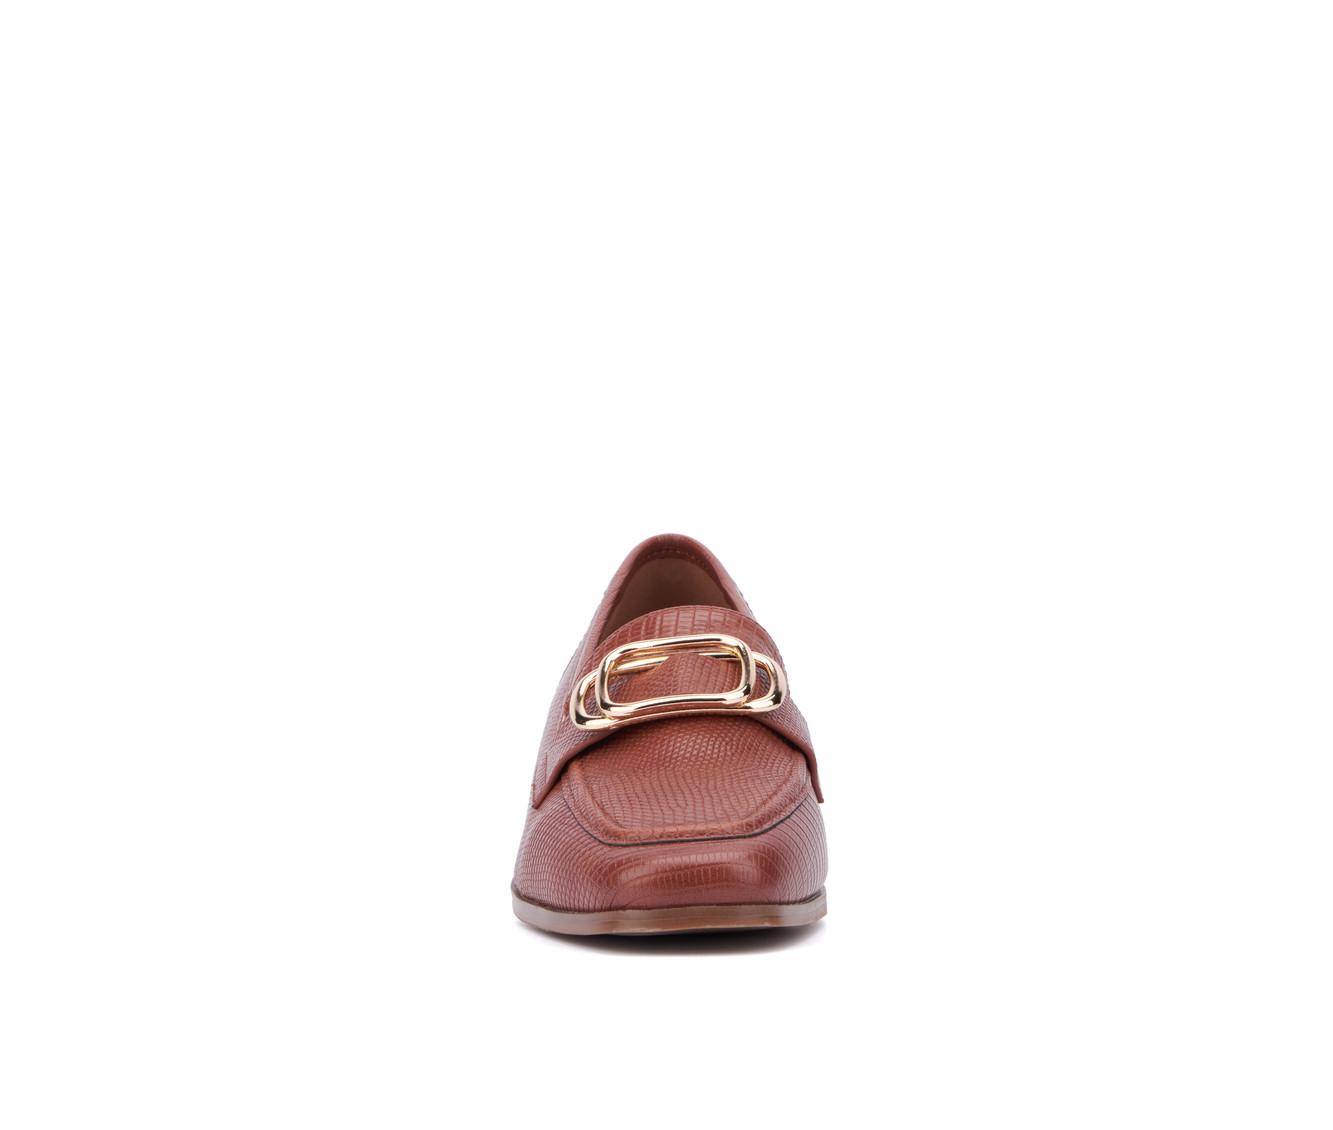 Women's New York and Company Ramira Loafers